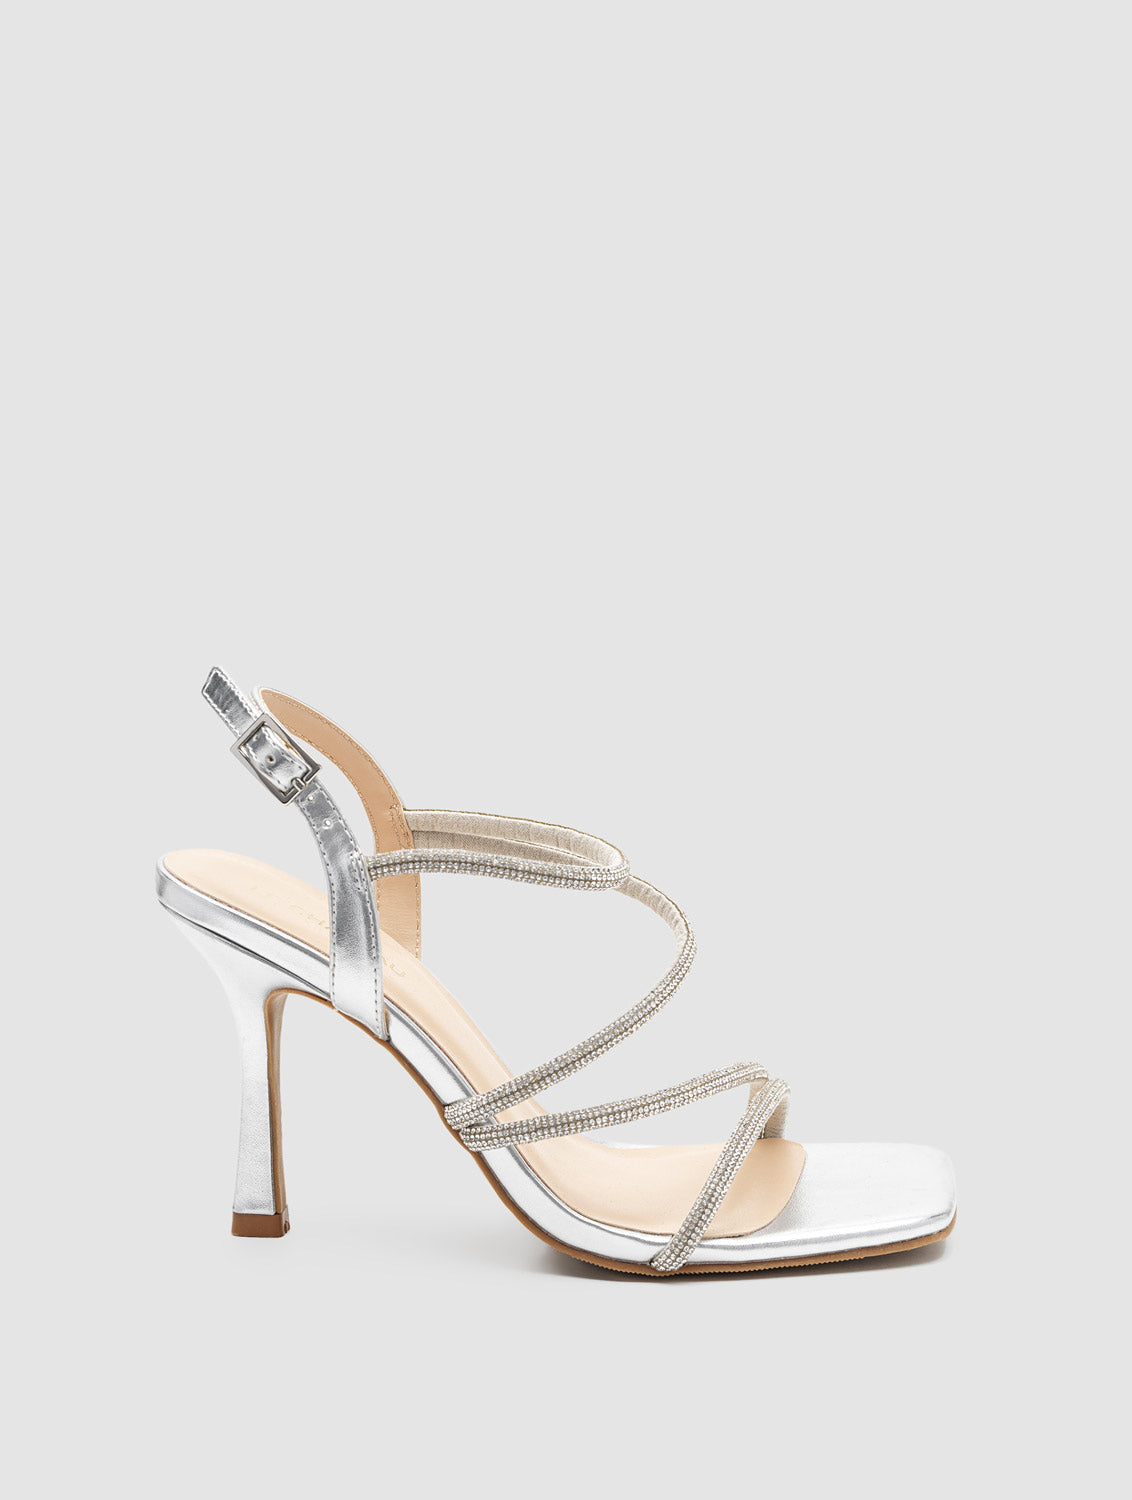 Square Toe High Heel Strappy Sandal With Rhinestones